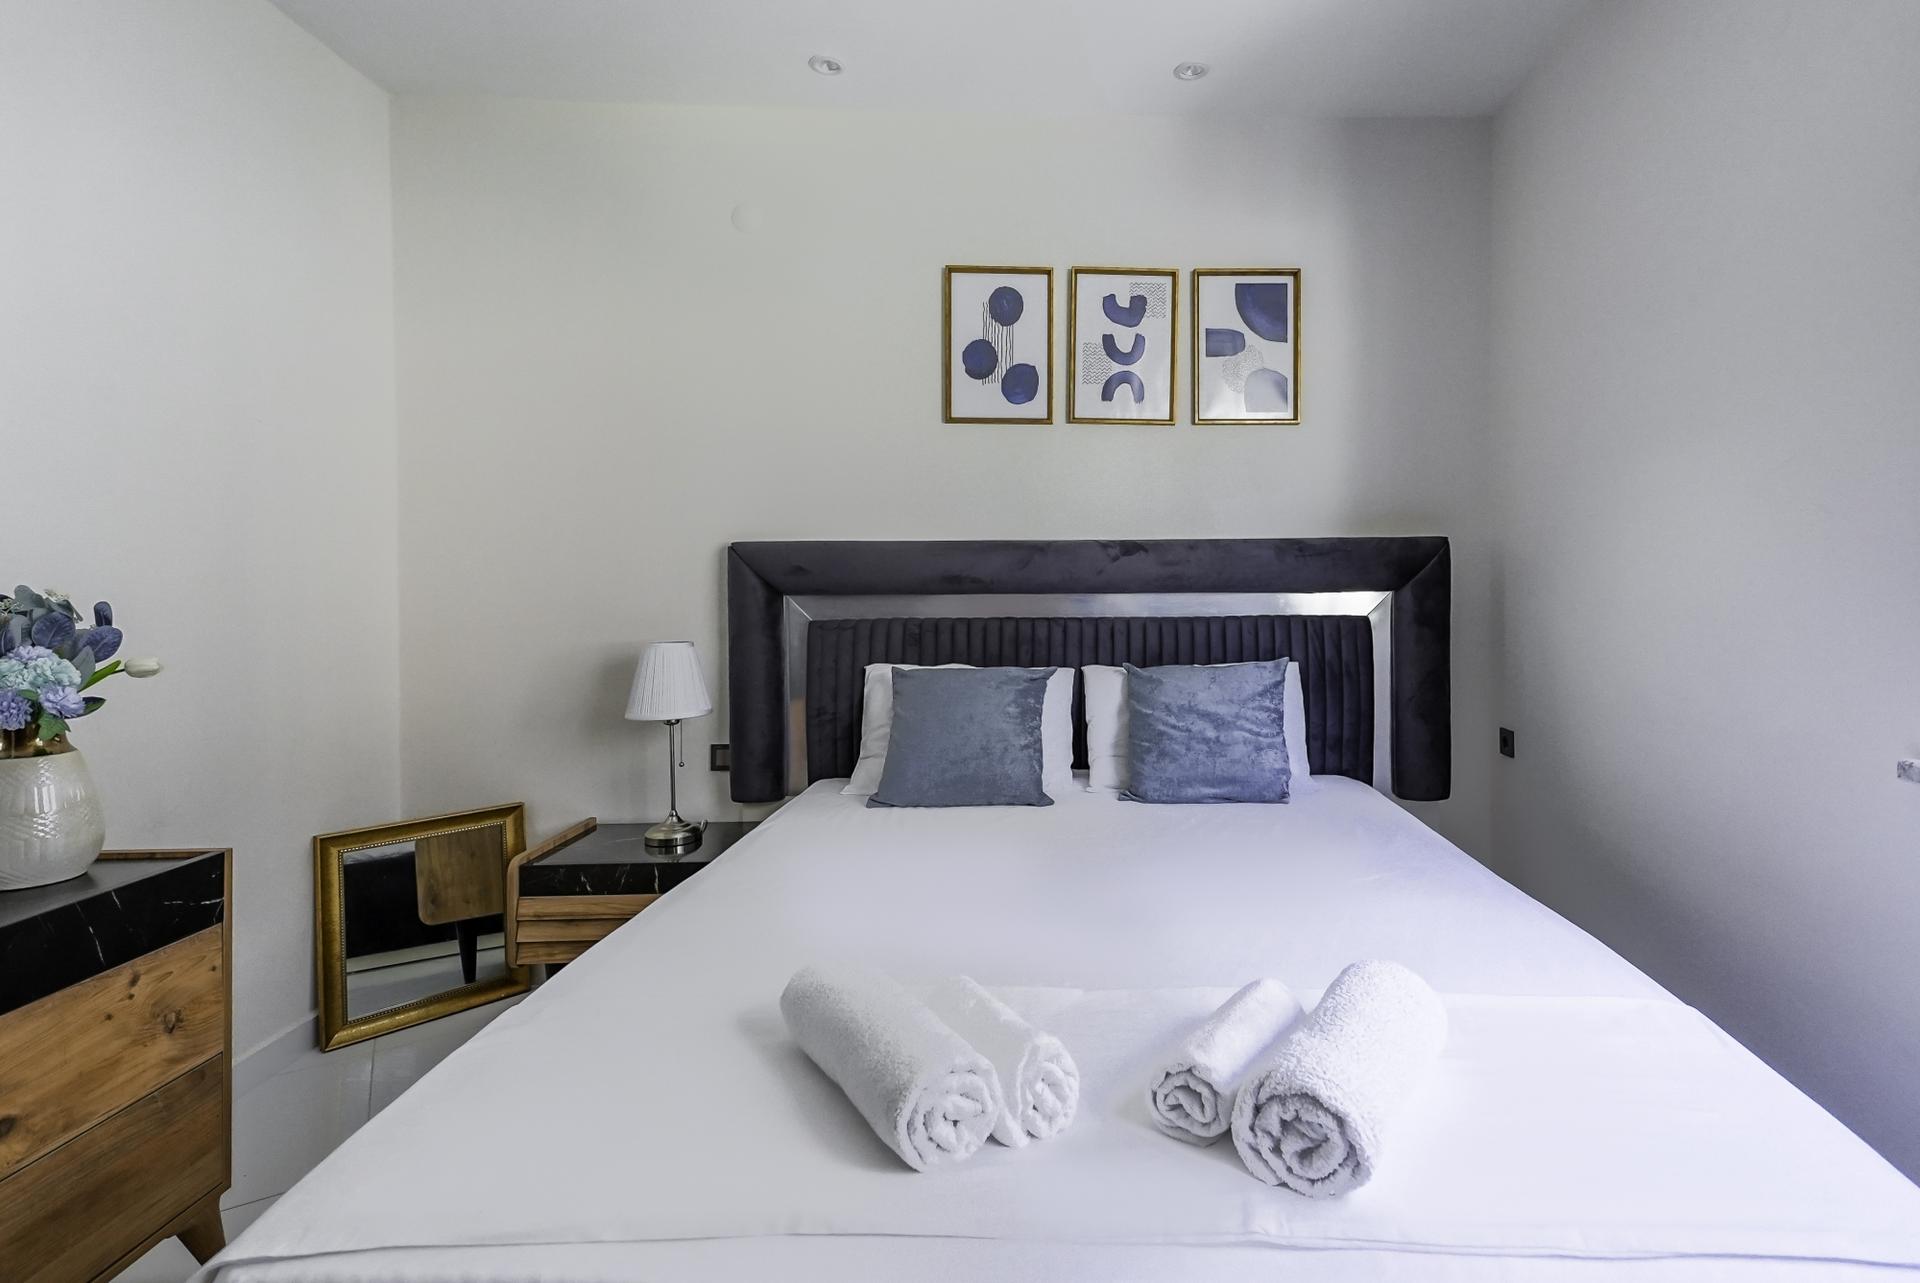 Our comfy residence flat features a bedroom with a large queen bed.